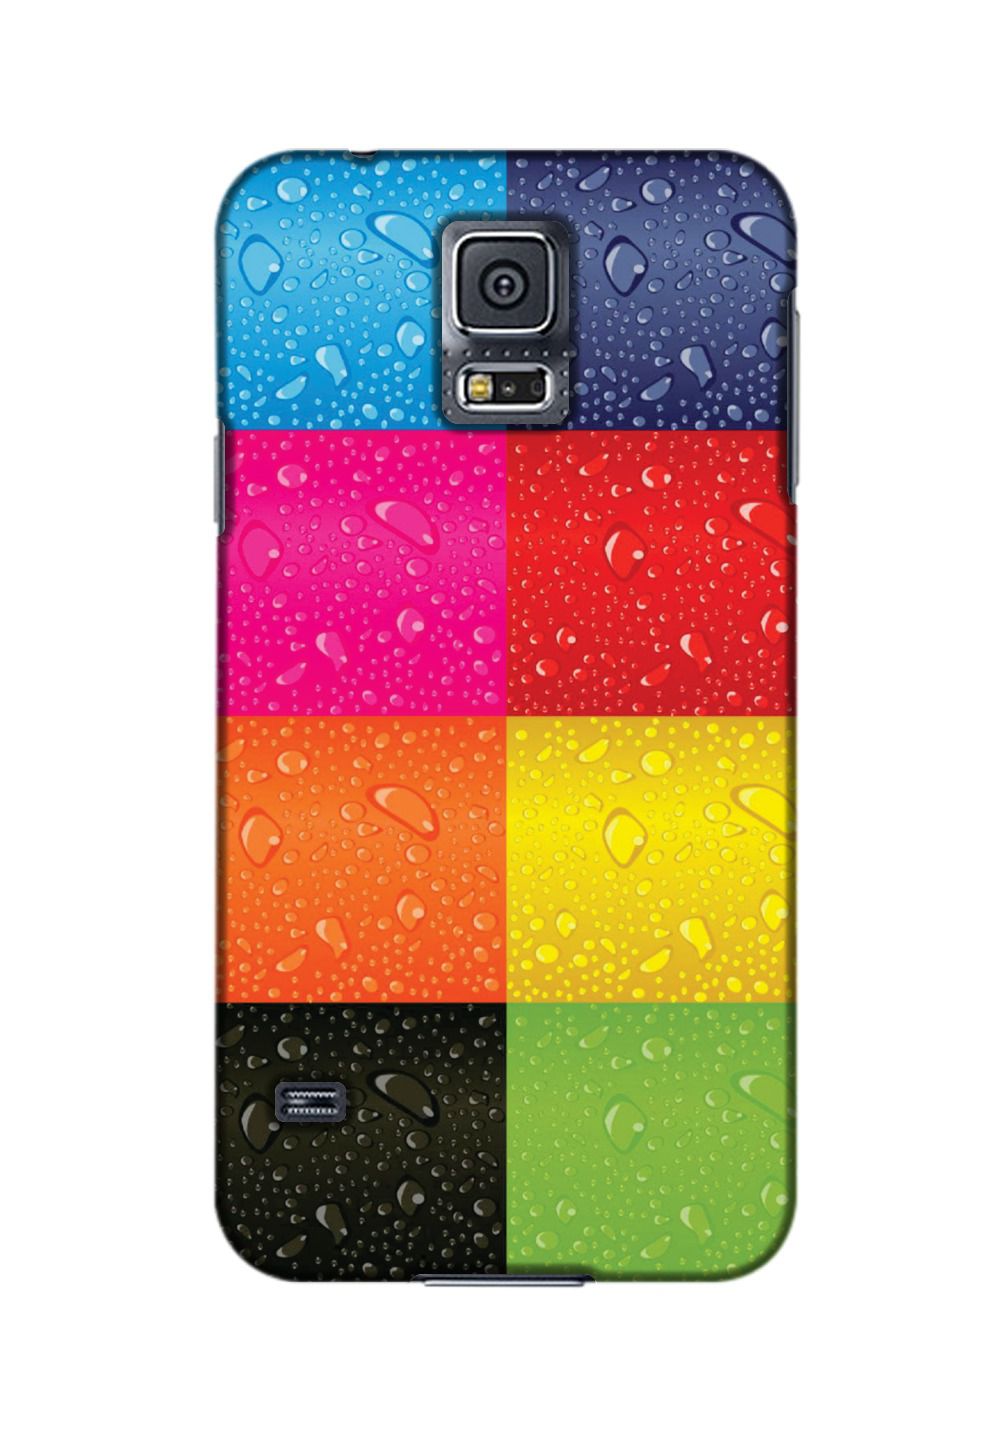 Samsung Galaxy S5 3D Back Covers By Printland Printed Back Covers Online at Low Prices